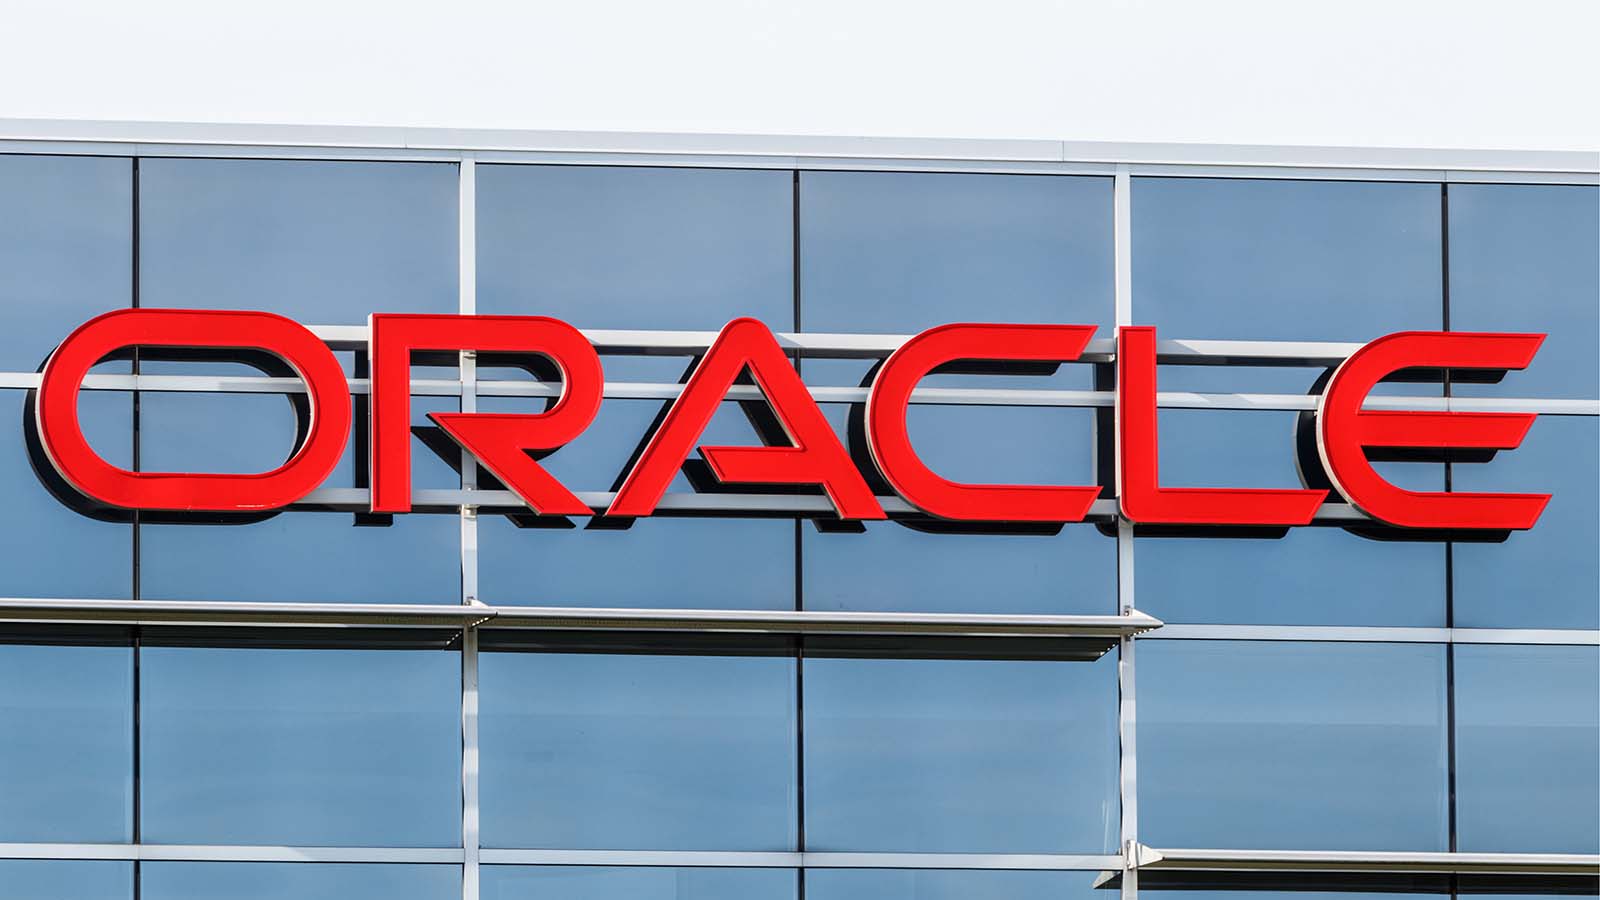 The Oracle (ORCL) sign hangs on an Oracle office in Deerfield, Illinois.